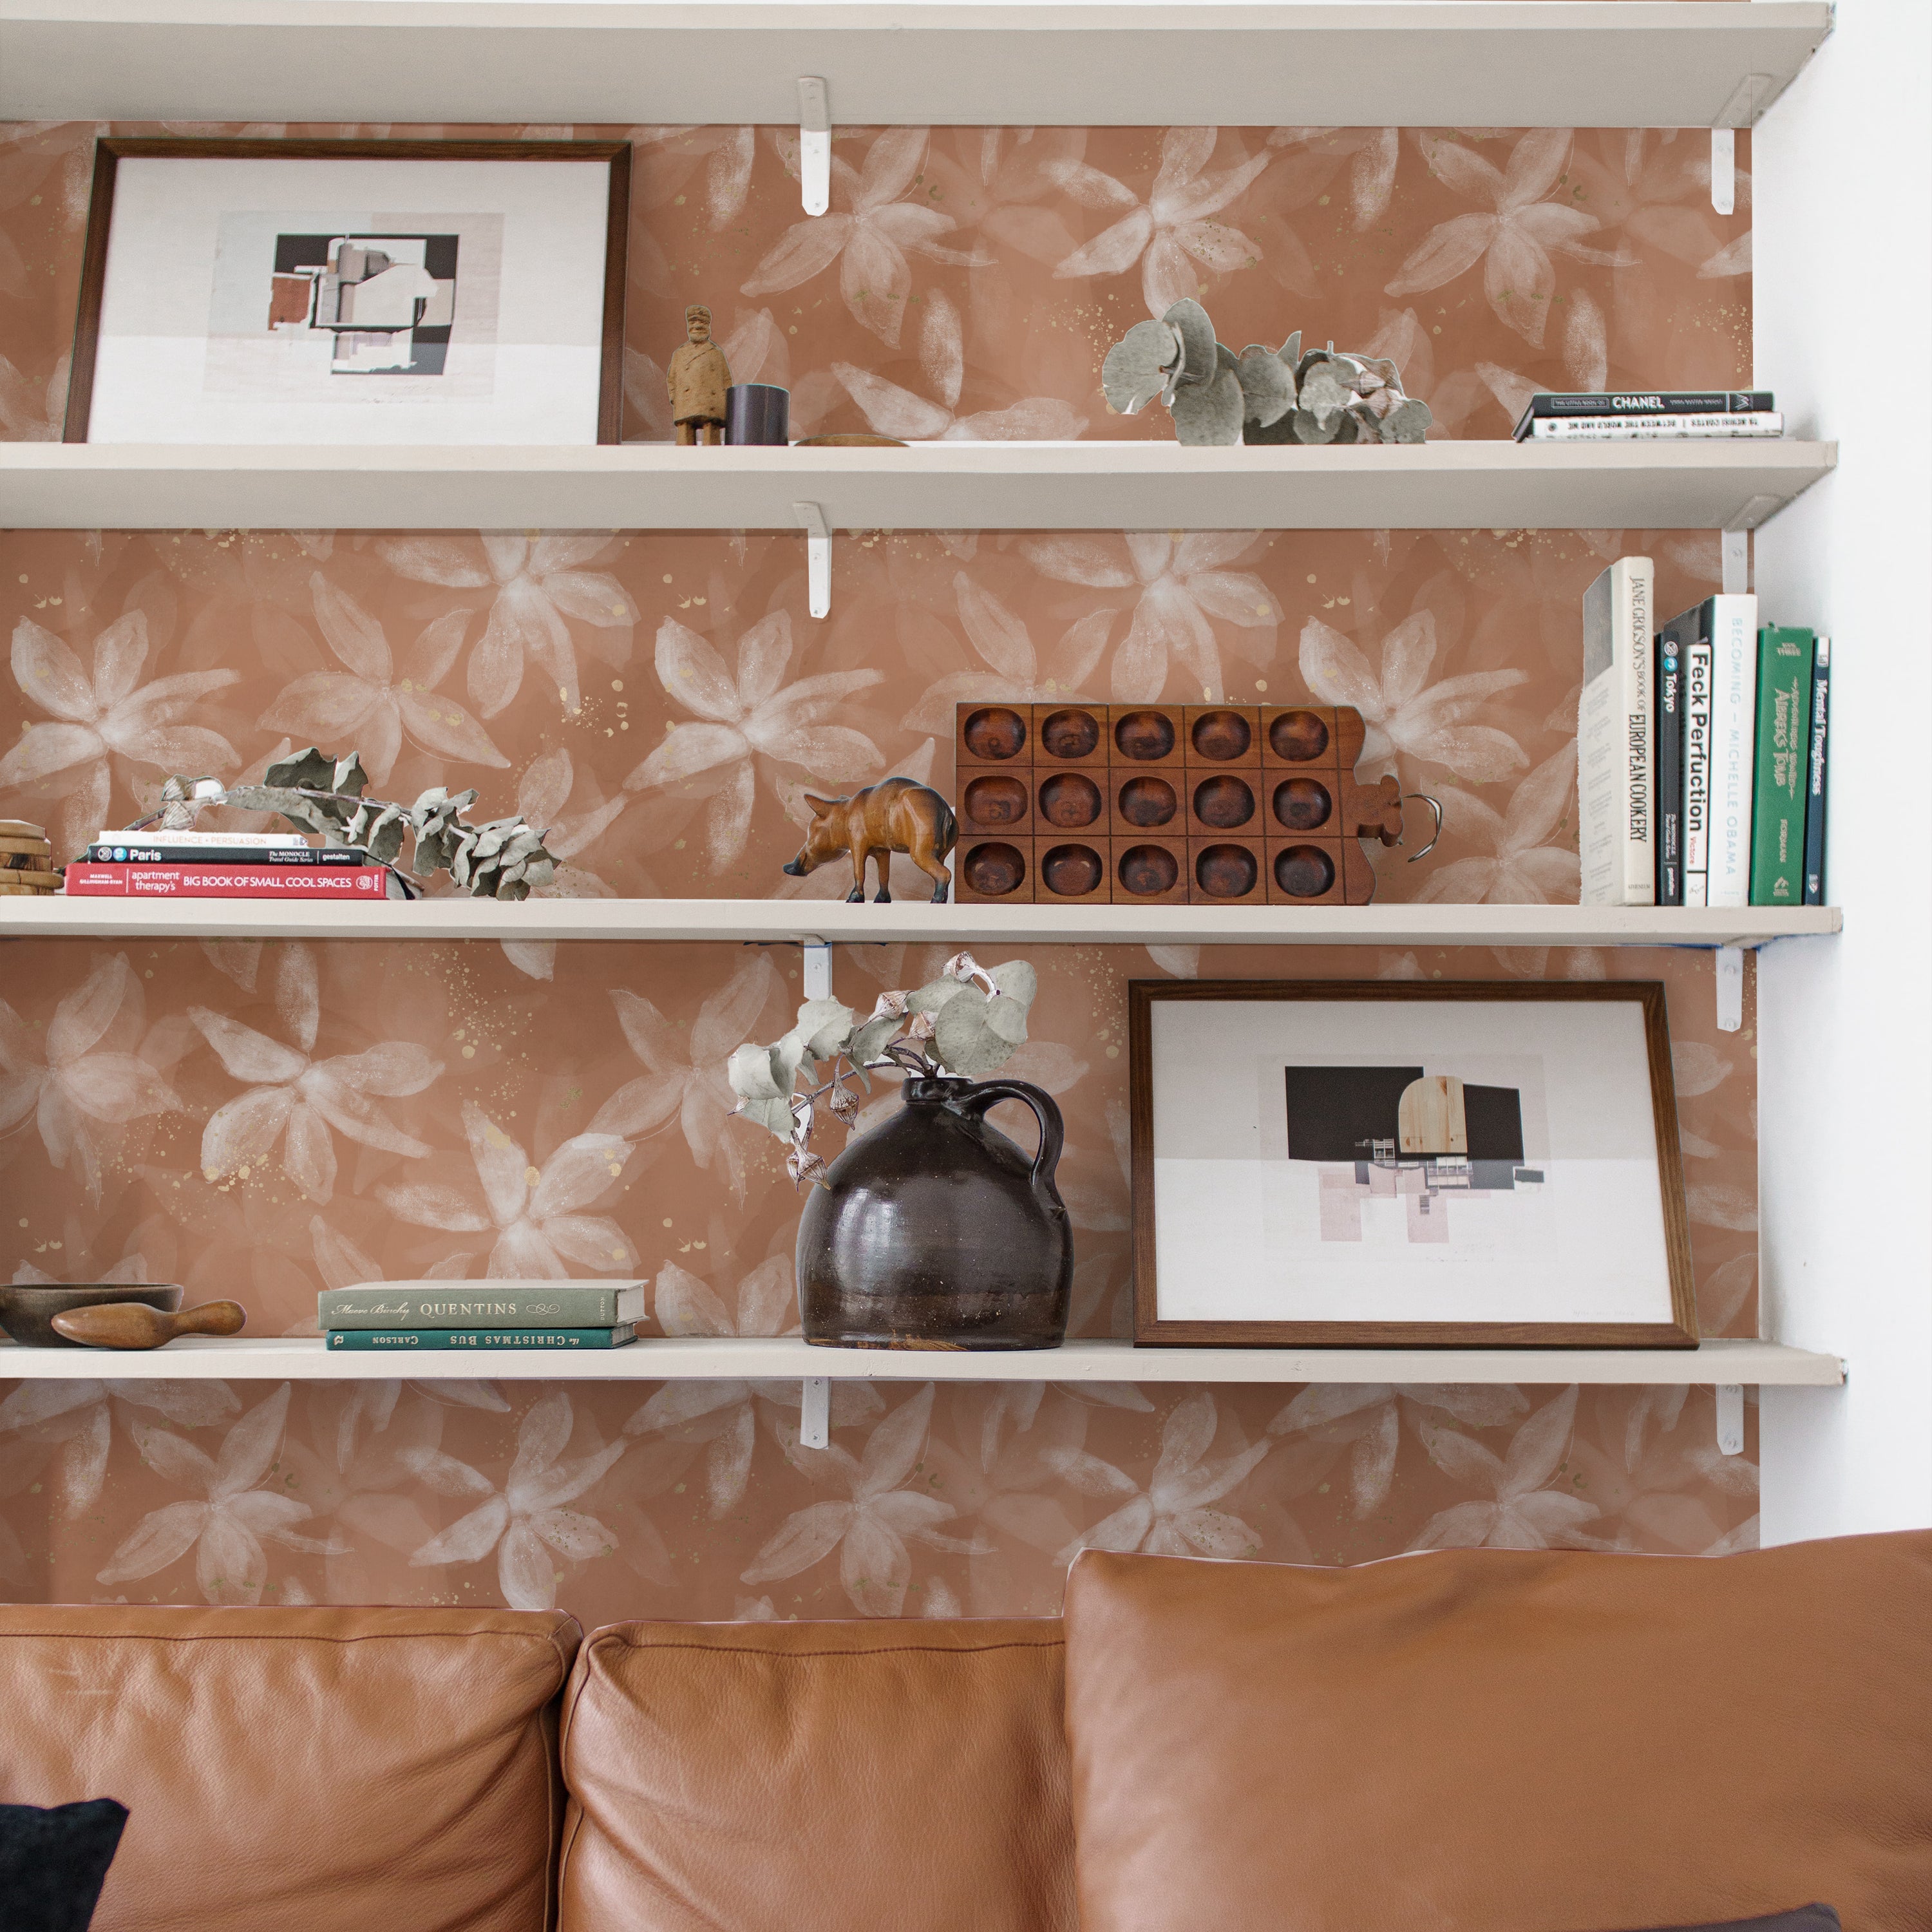 A stylish living room with Shimmer and Terracotta Wallpaper accenting the wall behind white shelves. The shelves are decorated with books, sculptures, and pottery, which complement the earthy tones of the wallpaper. The pattern of translucent flowers adds a delicate touch to the room's decor